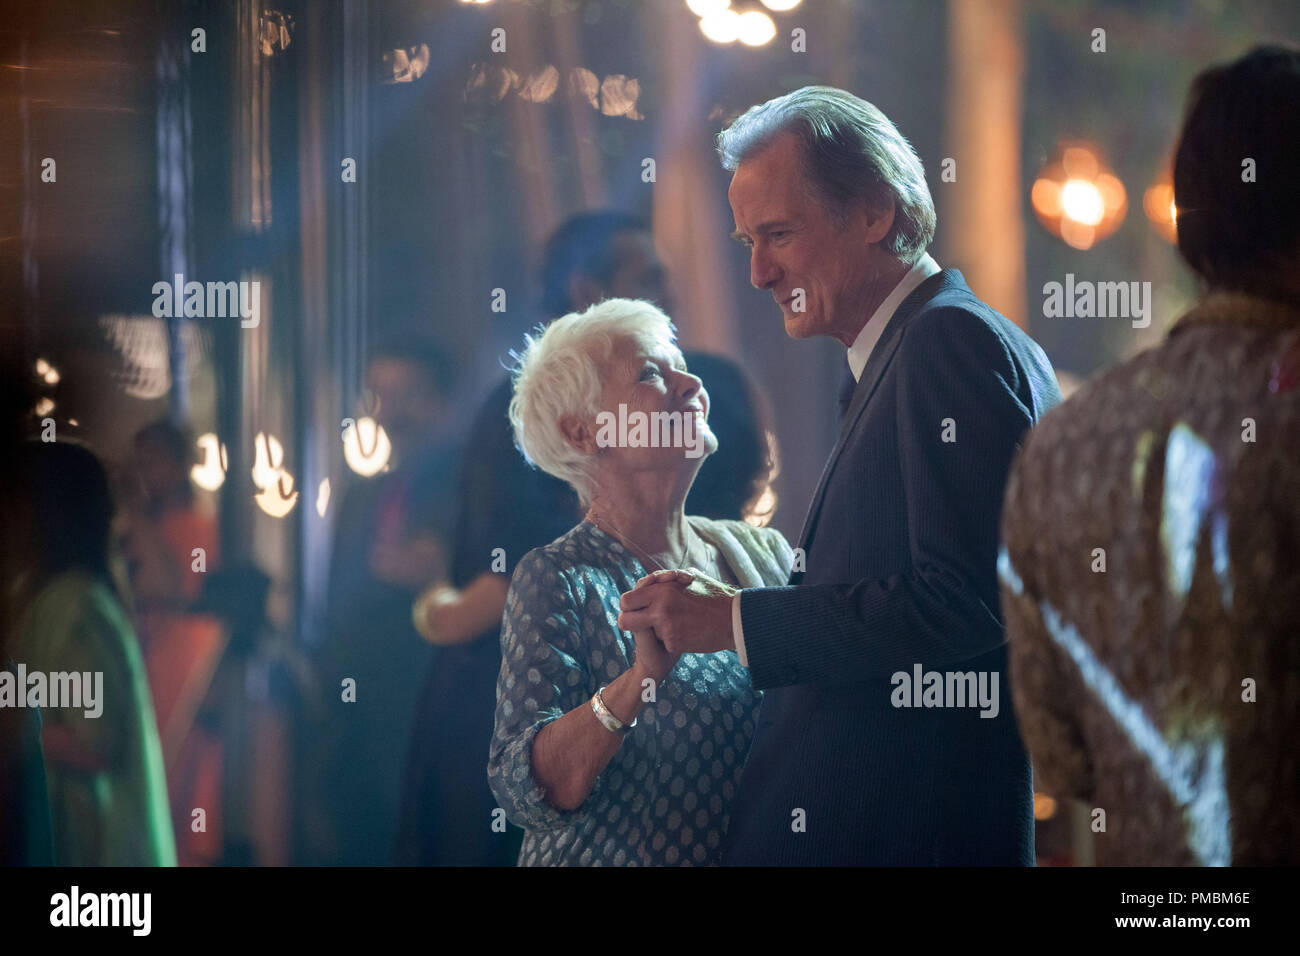 Judi Dench as 'Evelyn Greenslade' and Bill Nighy as 'Douglas Ainslie' in THE BEST EXOTIC MARIGOLD HOTEL 2. Photo by: Laurie Sparham. Stock Photo